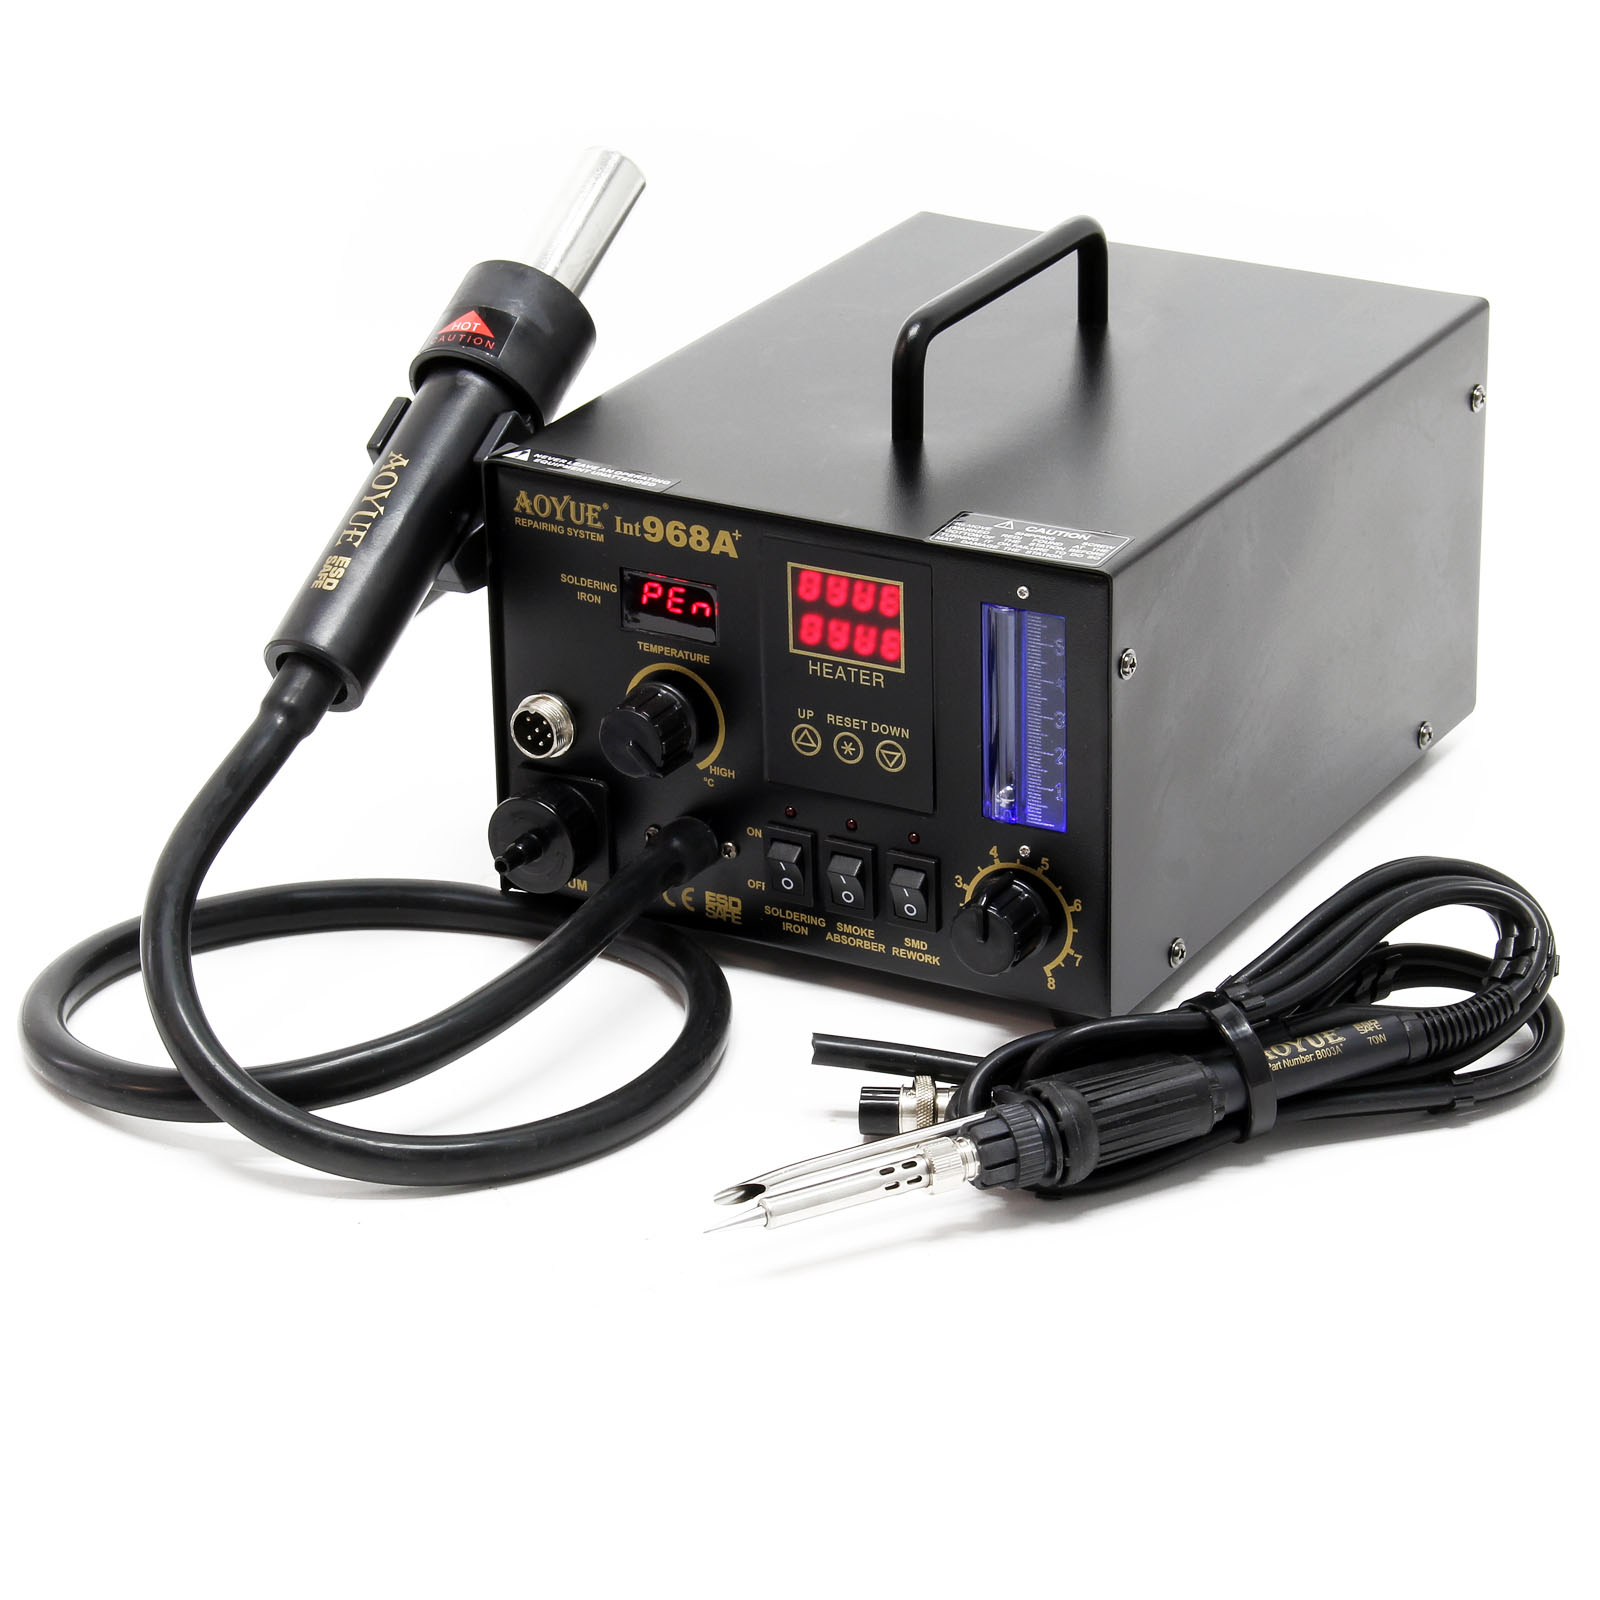 AOYUE Int968A+ RepairingStation Hot Air Soldering Station 3in1